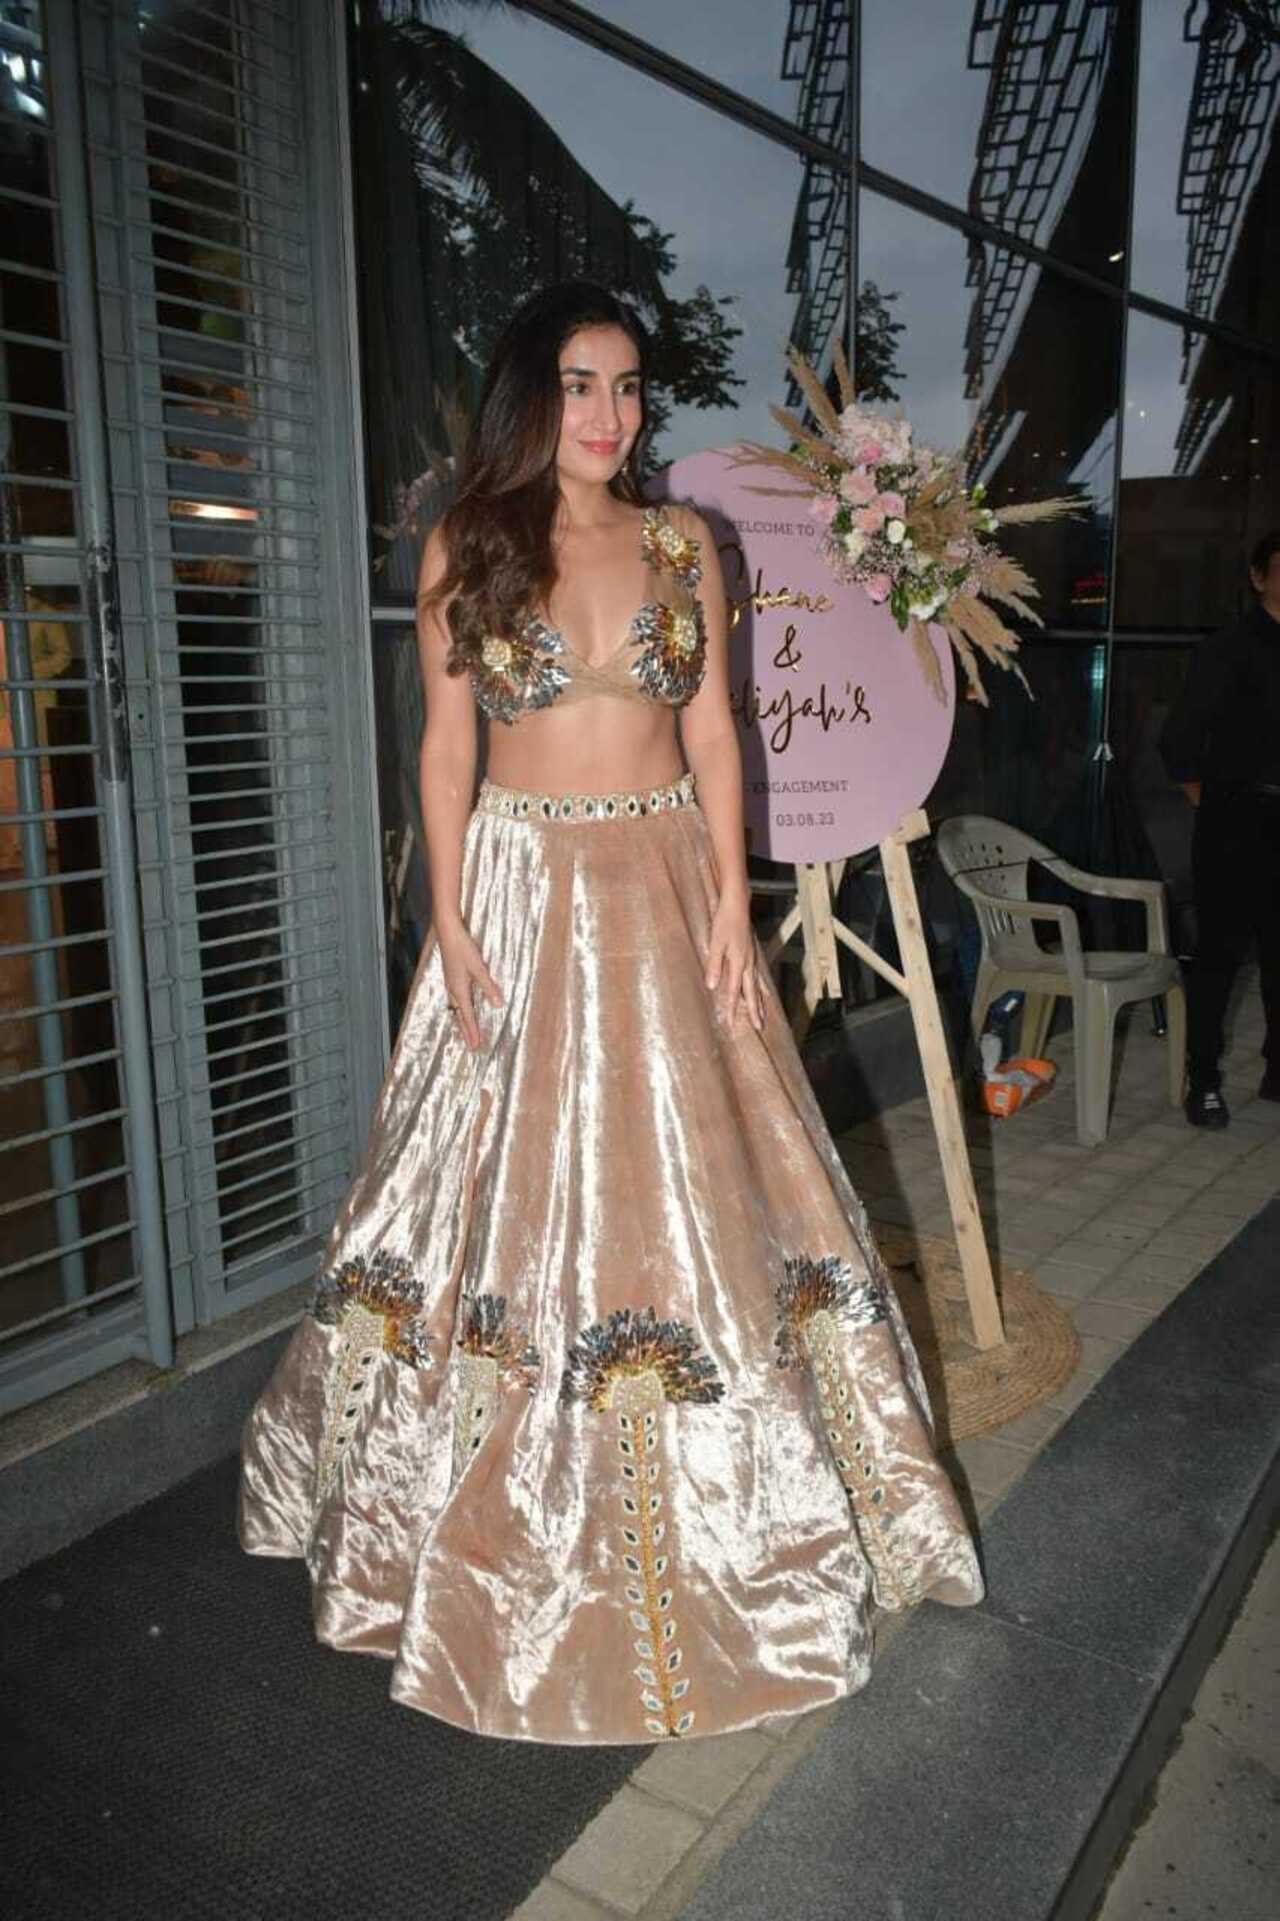 Parul Gulati opted for a beautiful lehenga as she attended Aaliyah's engagement party